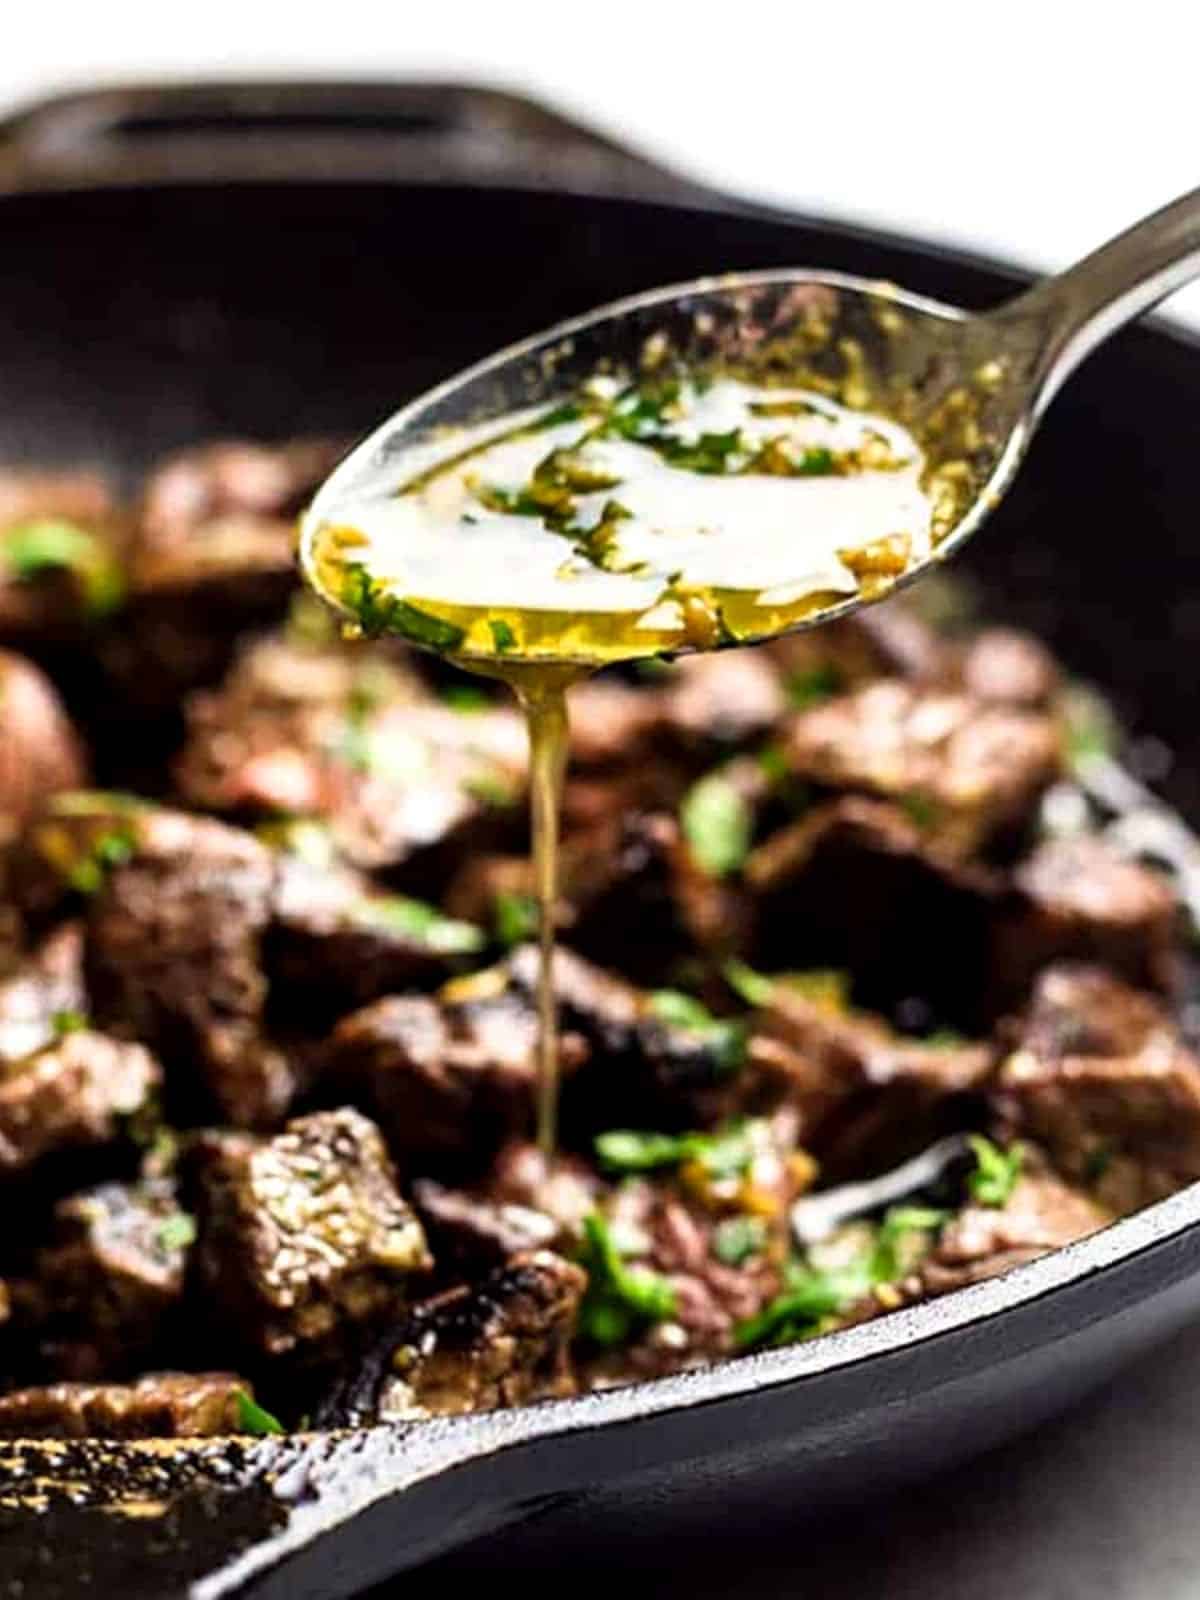 Steak bites being topped with melted butter.